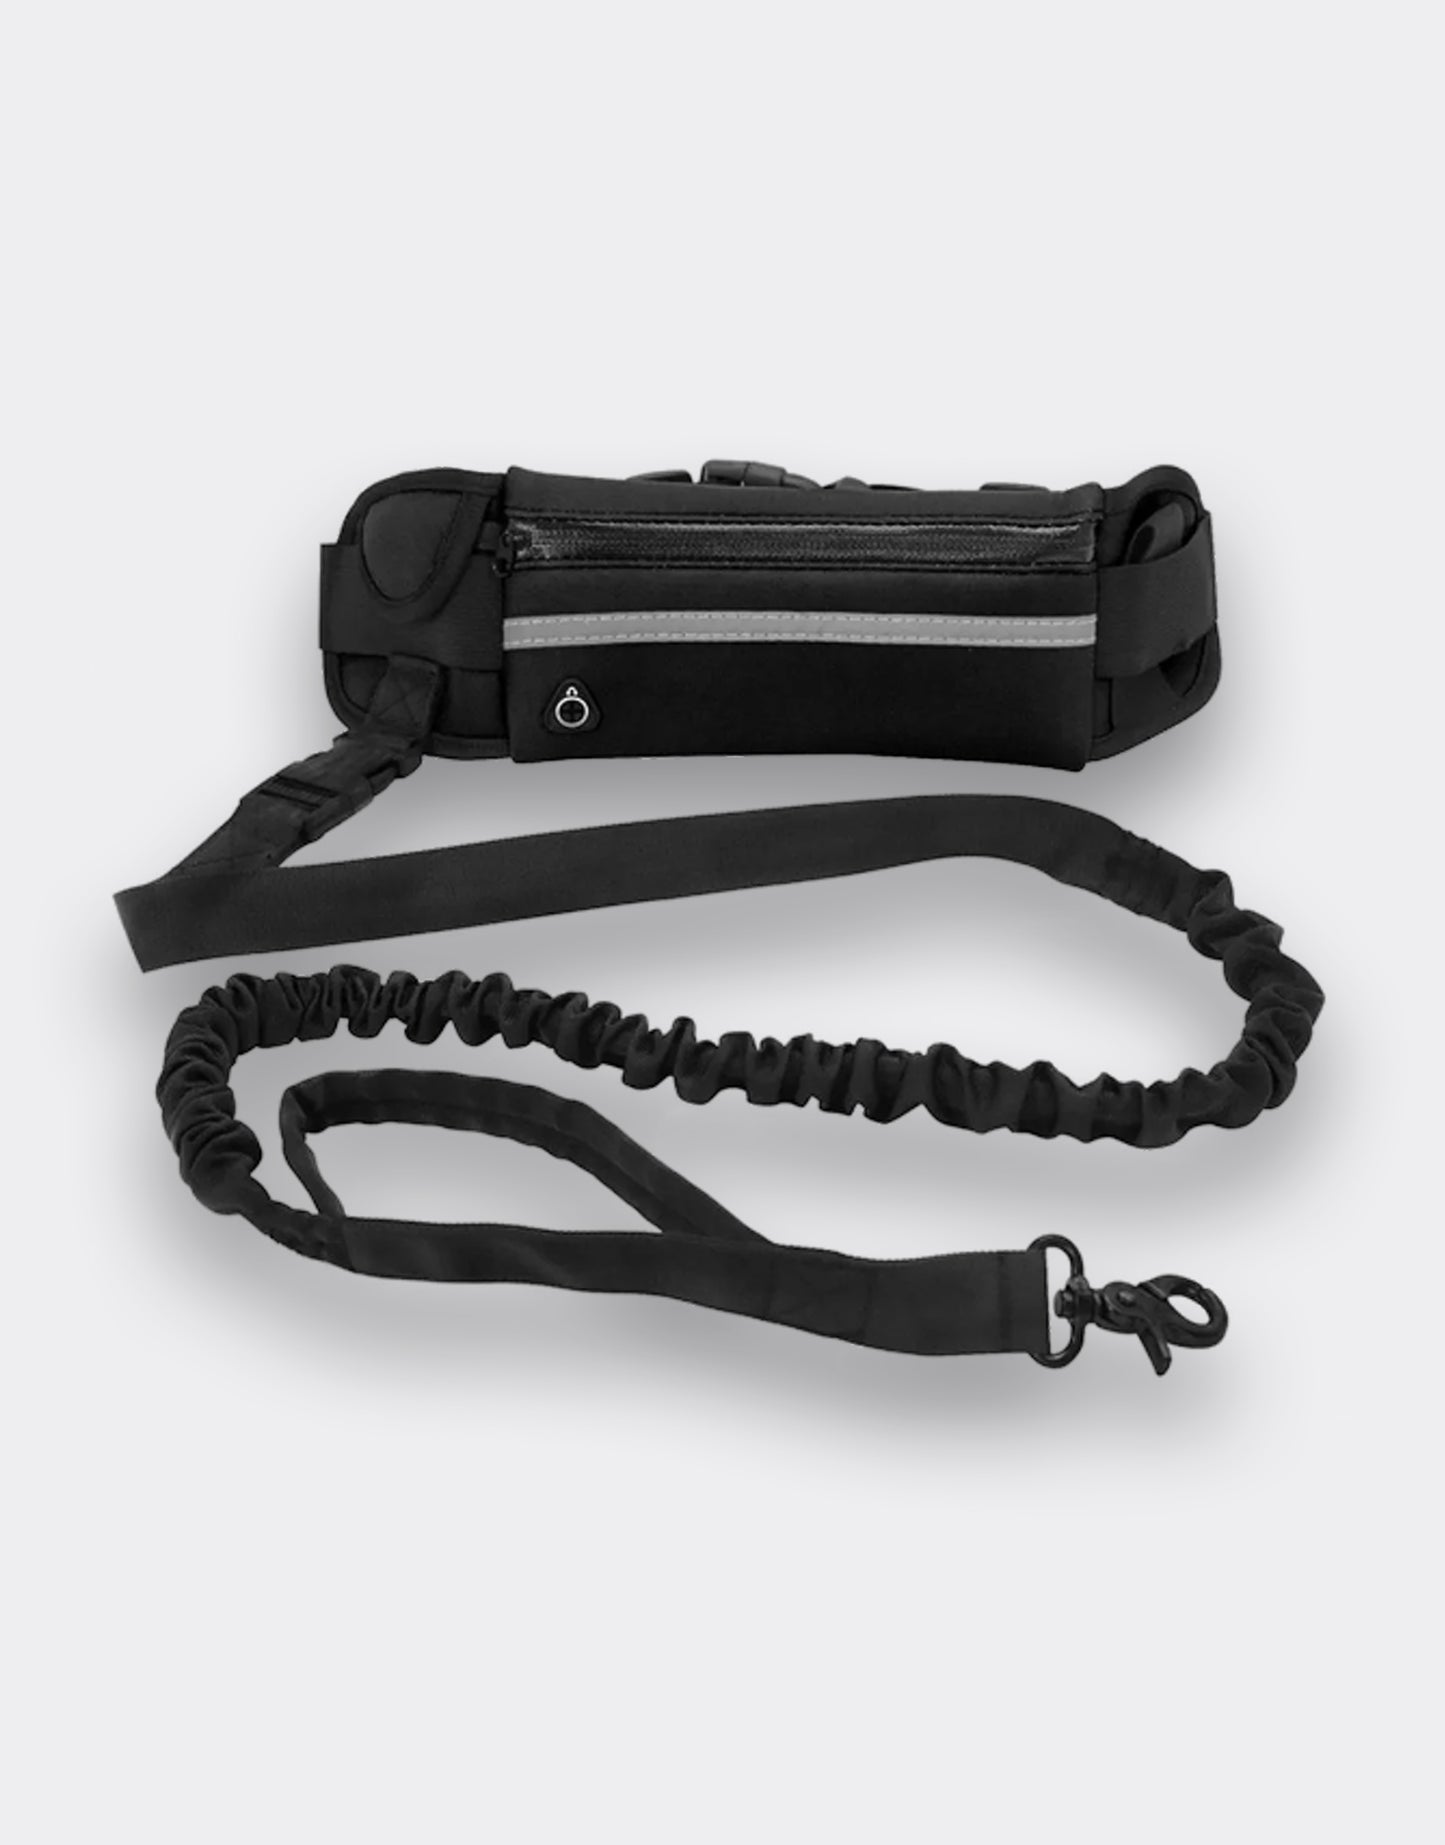 Reflective Waist Dog Leash | Chewy’s Pet Store